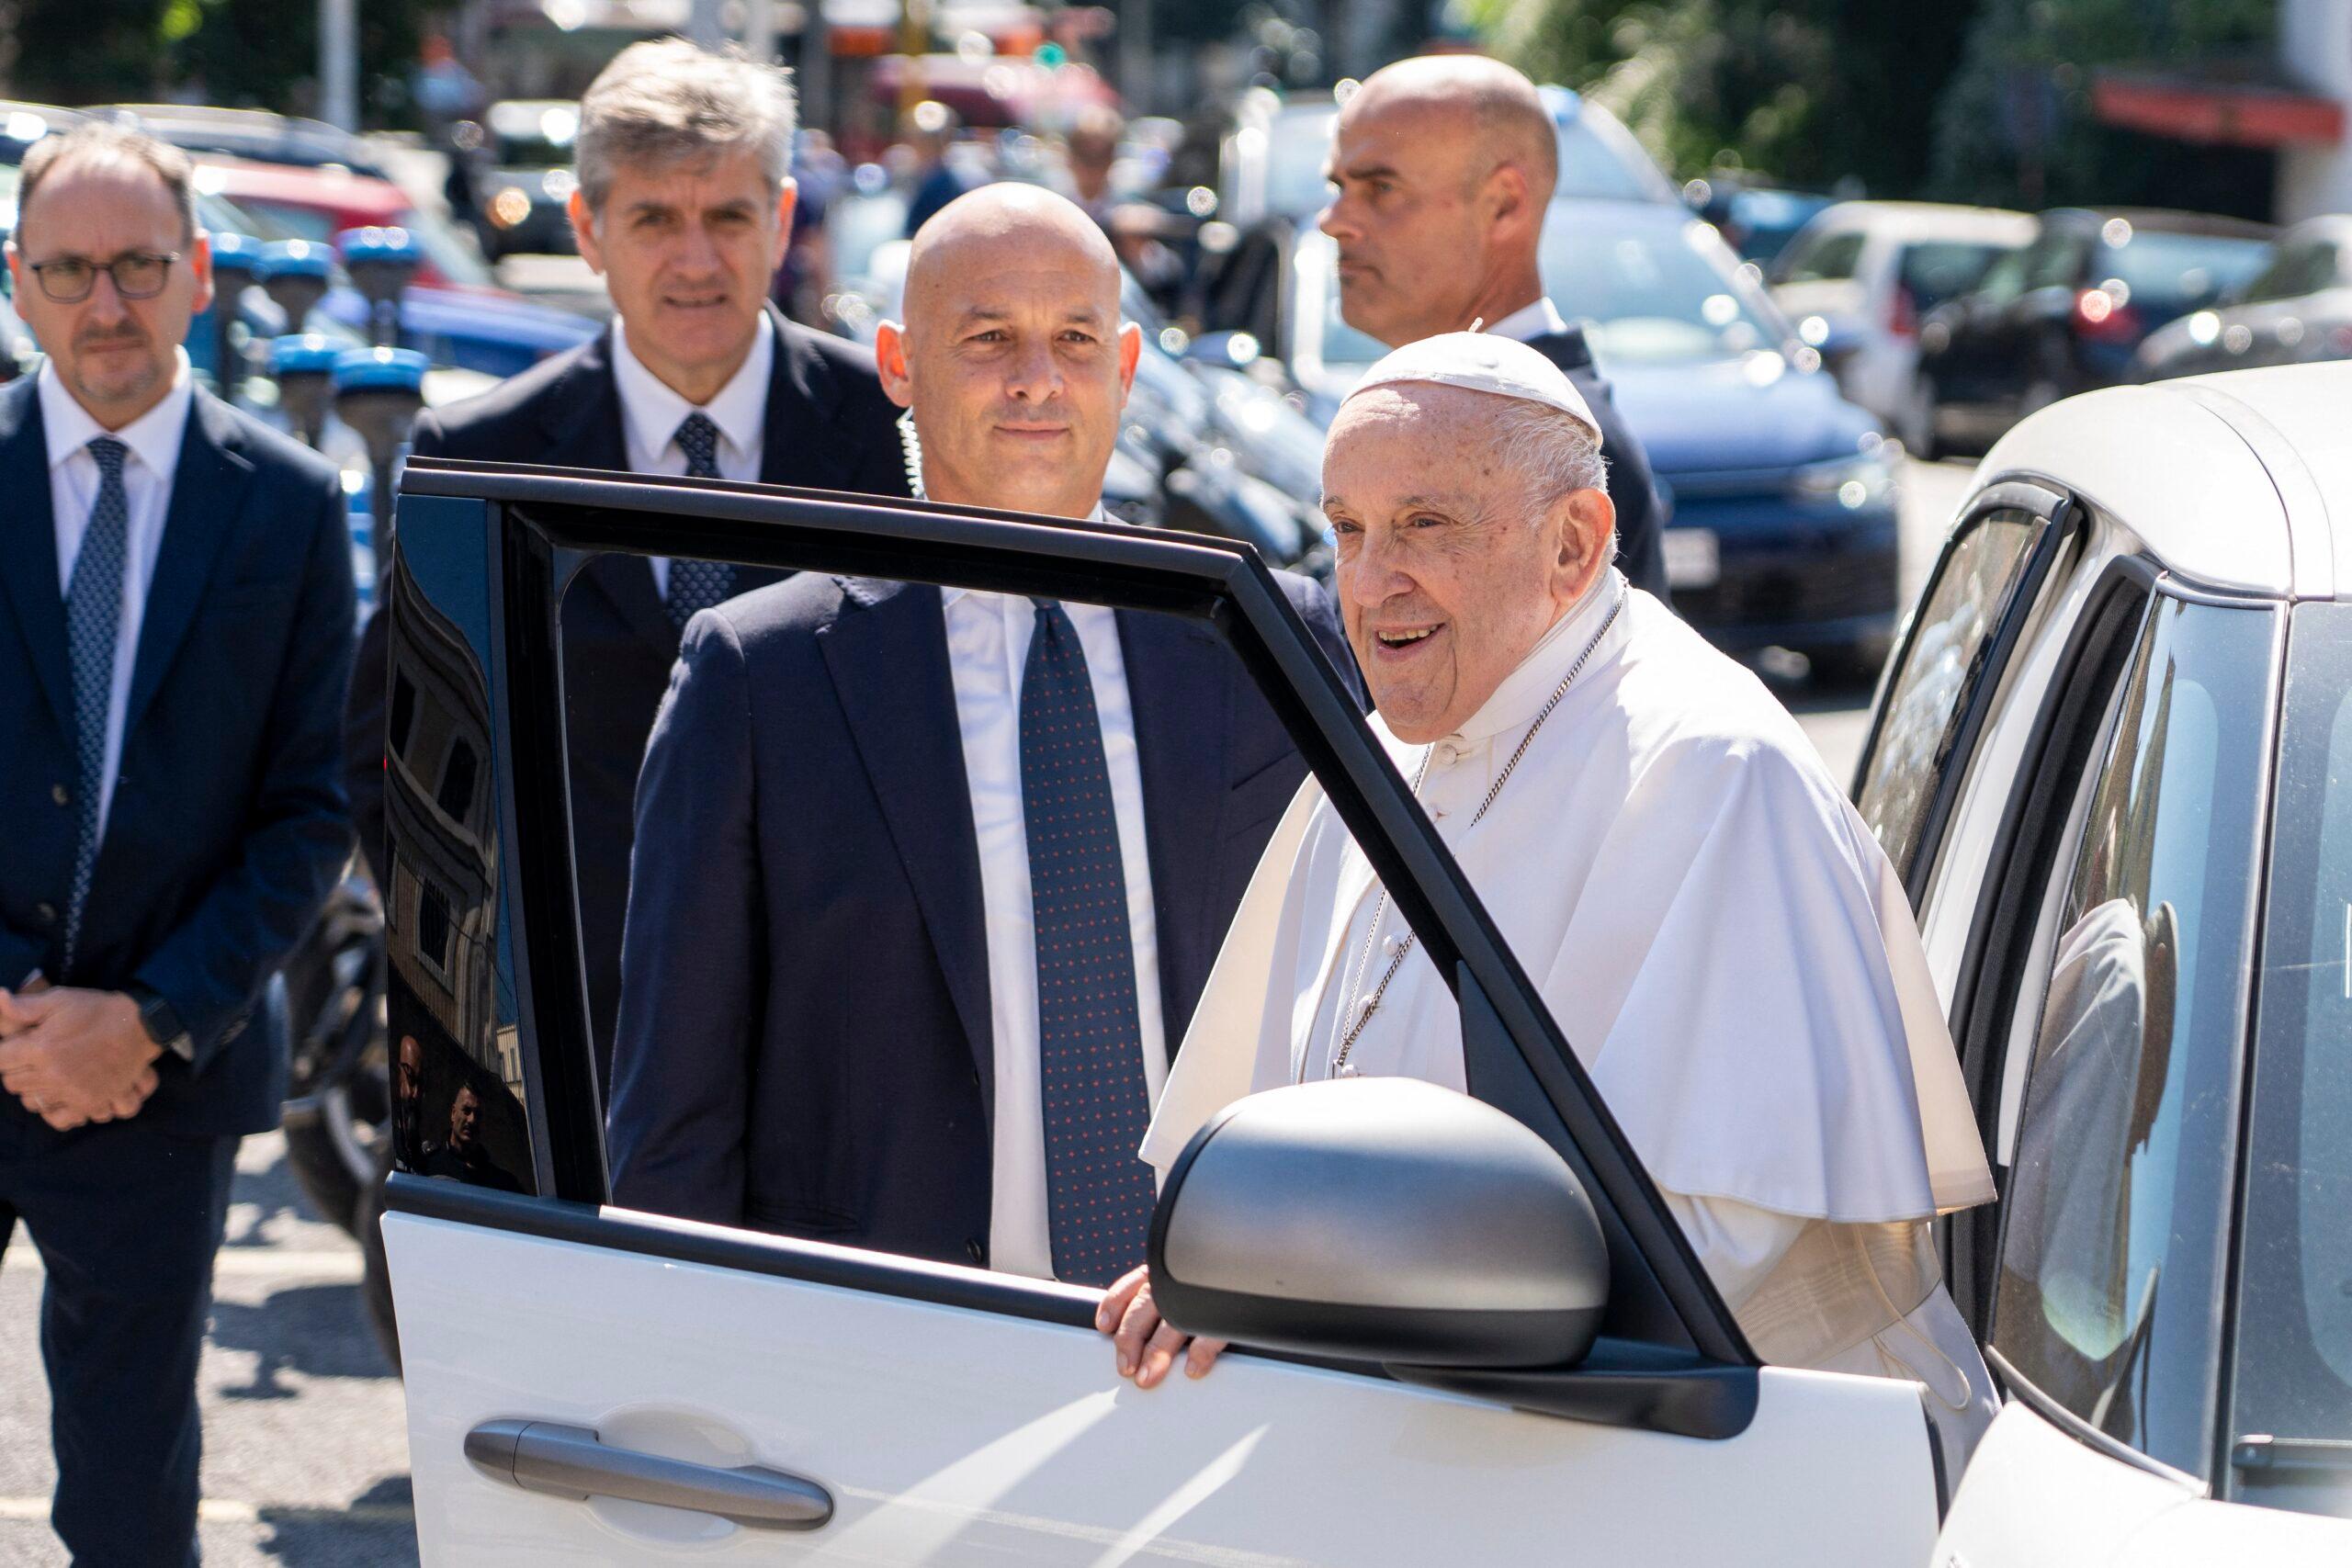 Pope Francis arrives at the Vatican from the Gemelli hospital